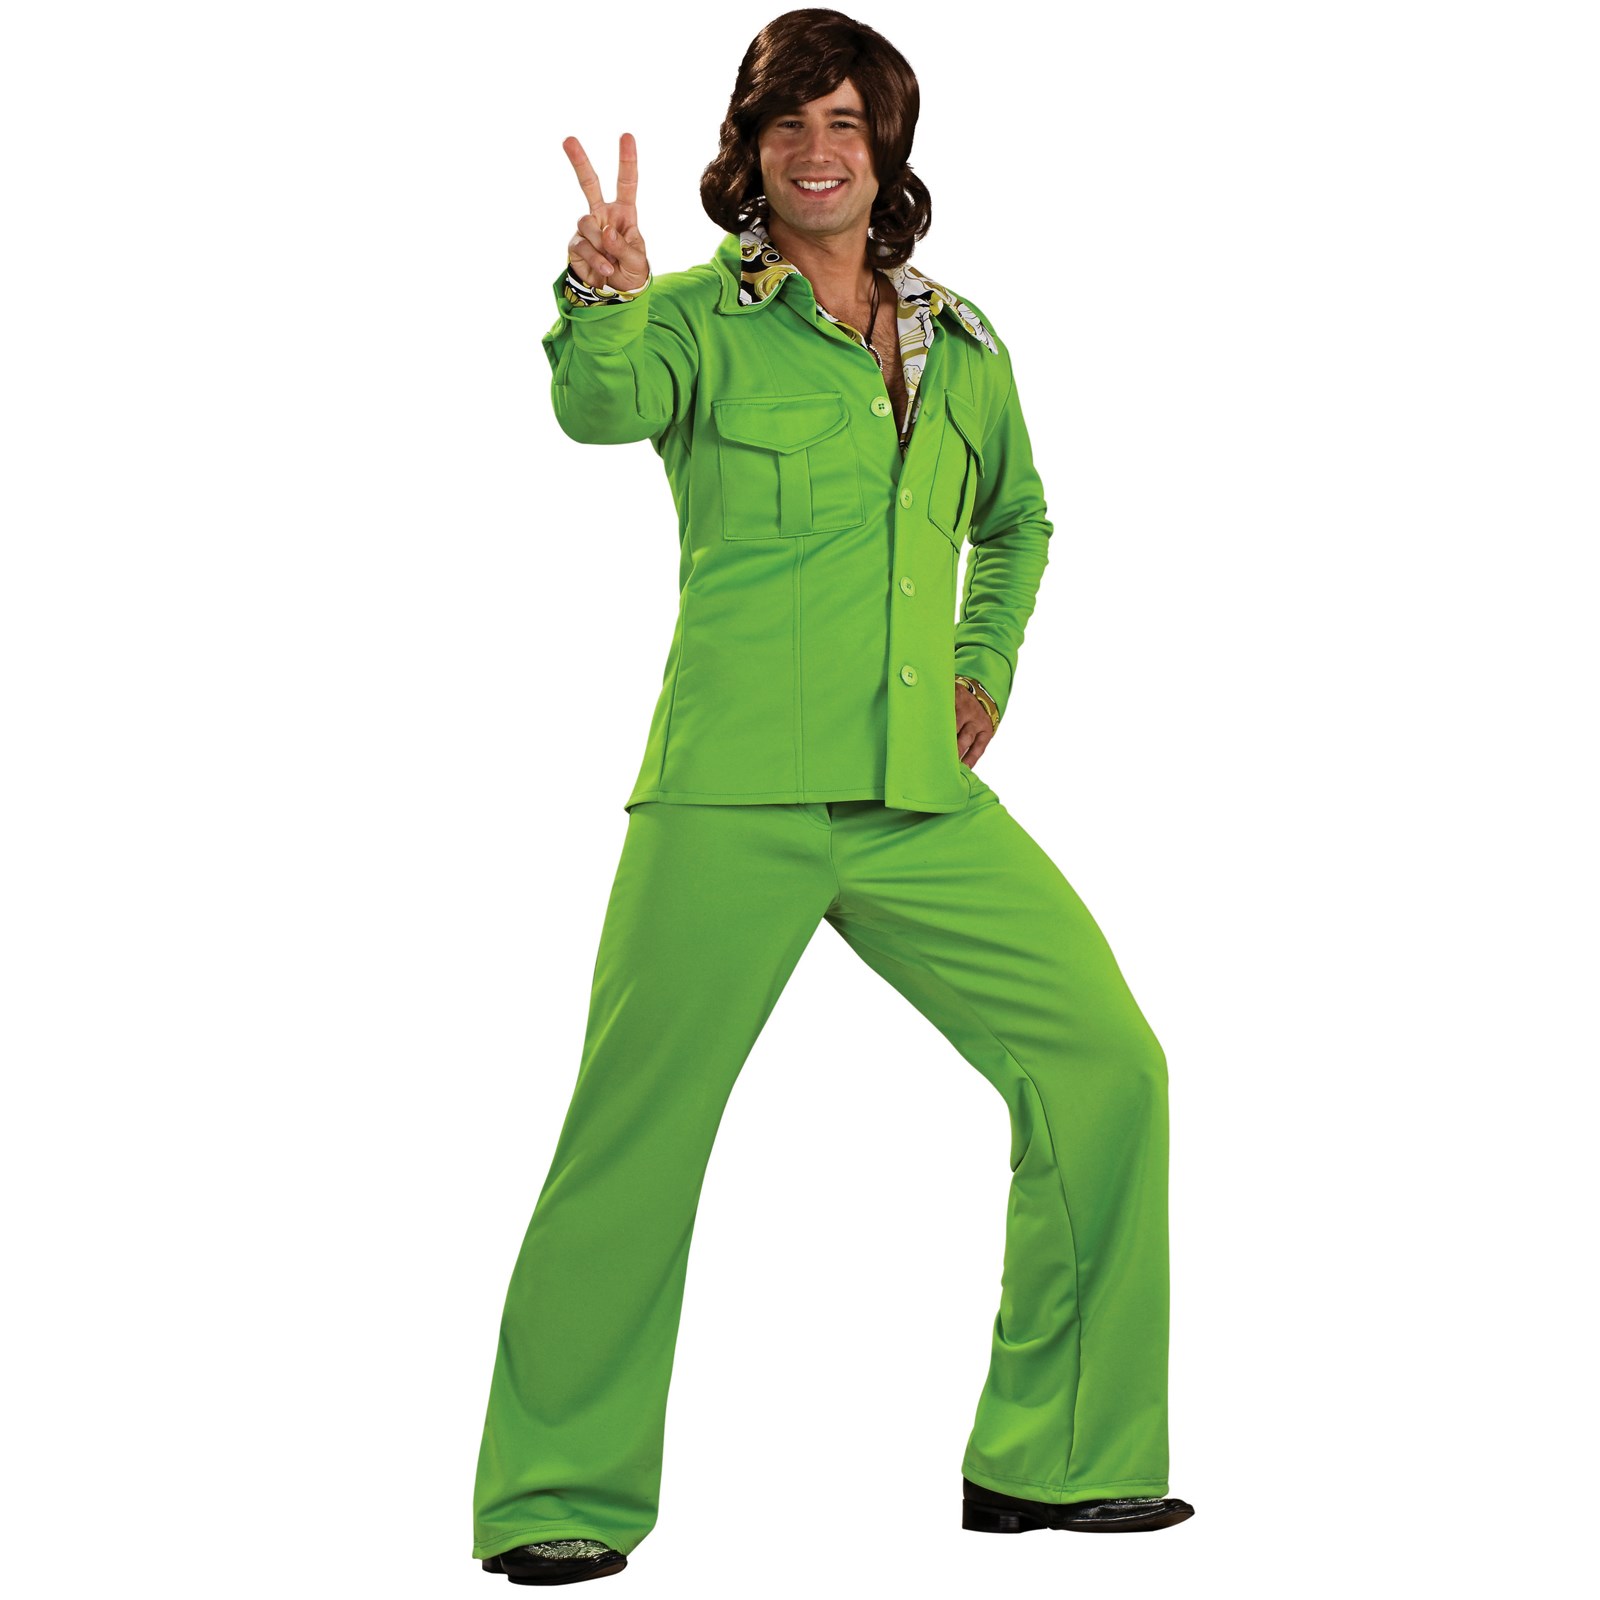 Leisure Suit Deluxe Lime Adult Costume